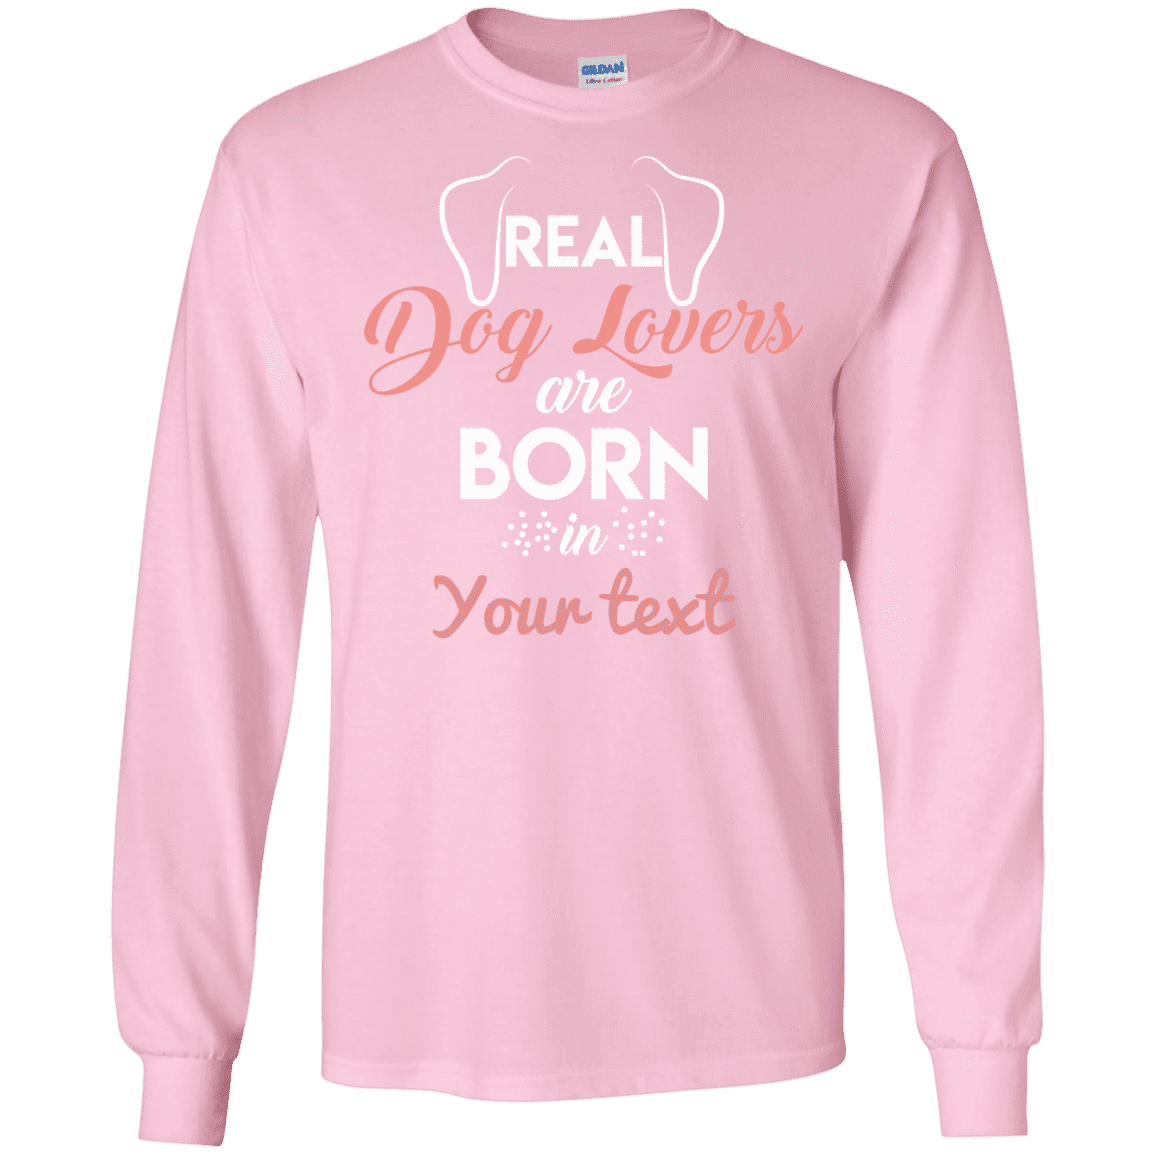 Personalized Real Dog Lovers - Long Sleeve T-Shirt.